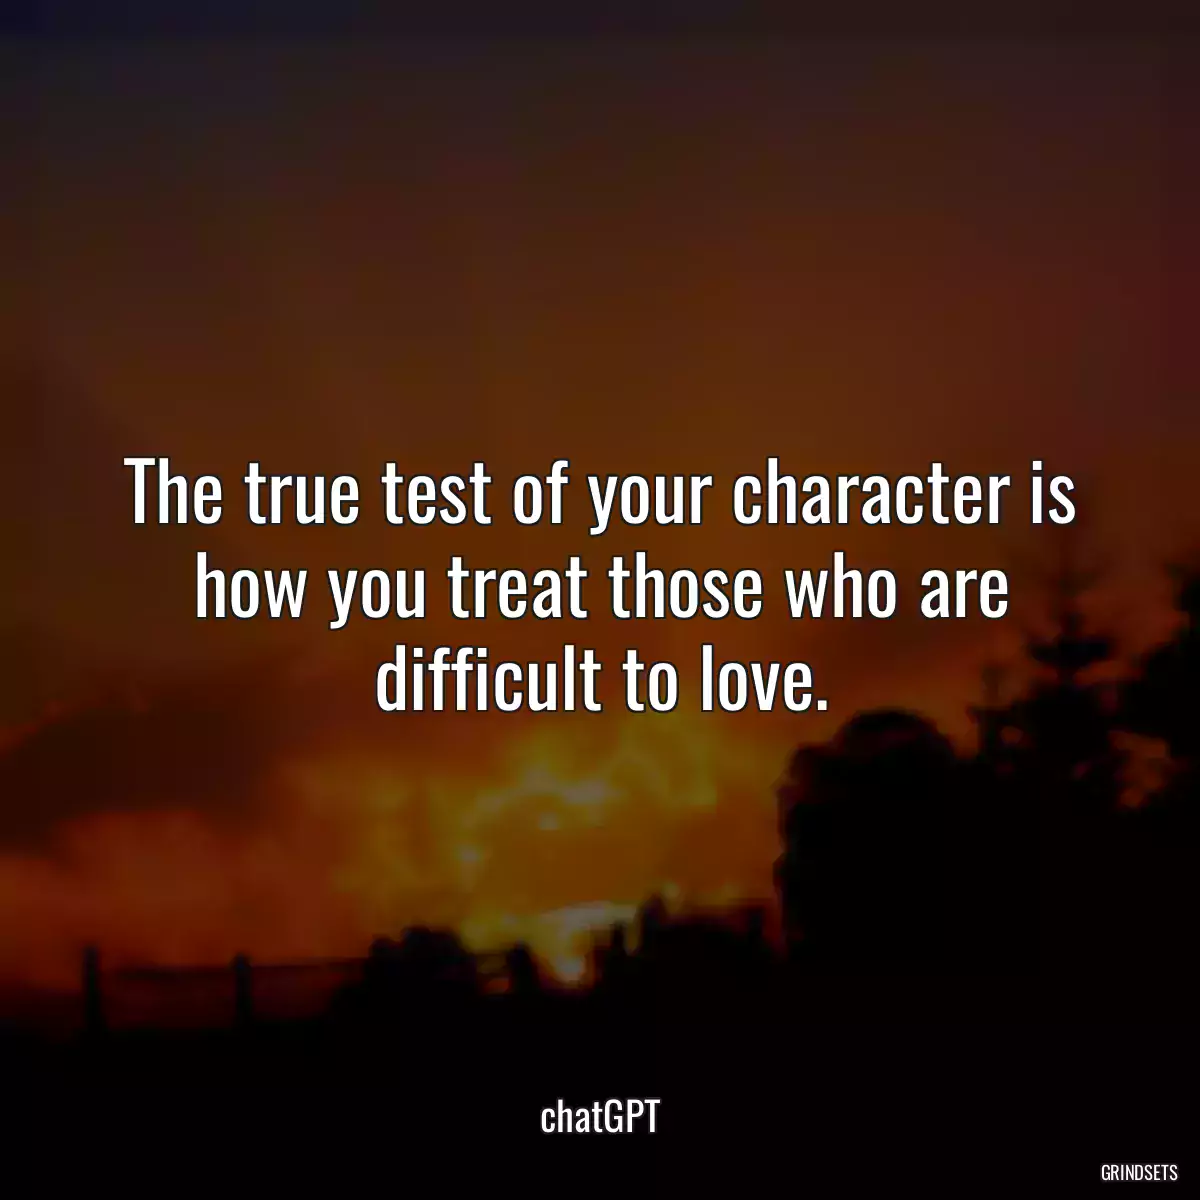 The true test of your character is how you treat those who are difficult to love.